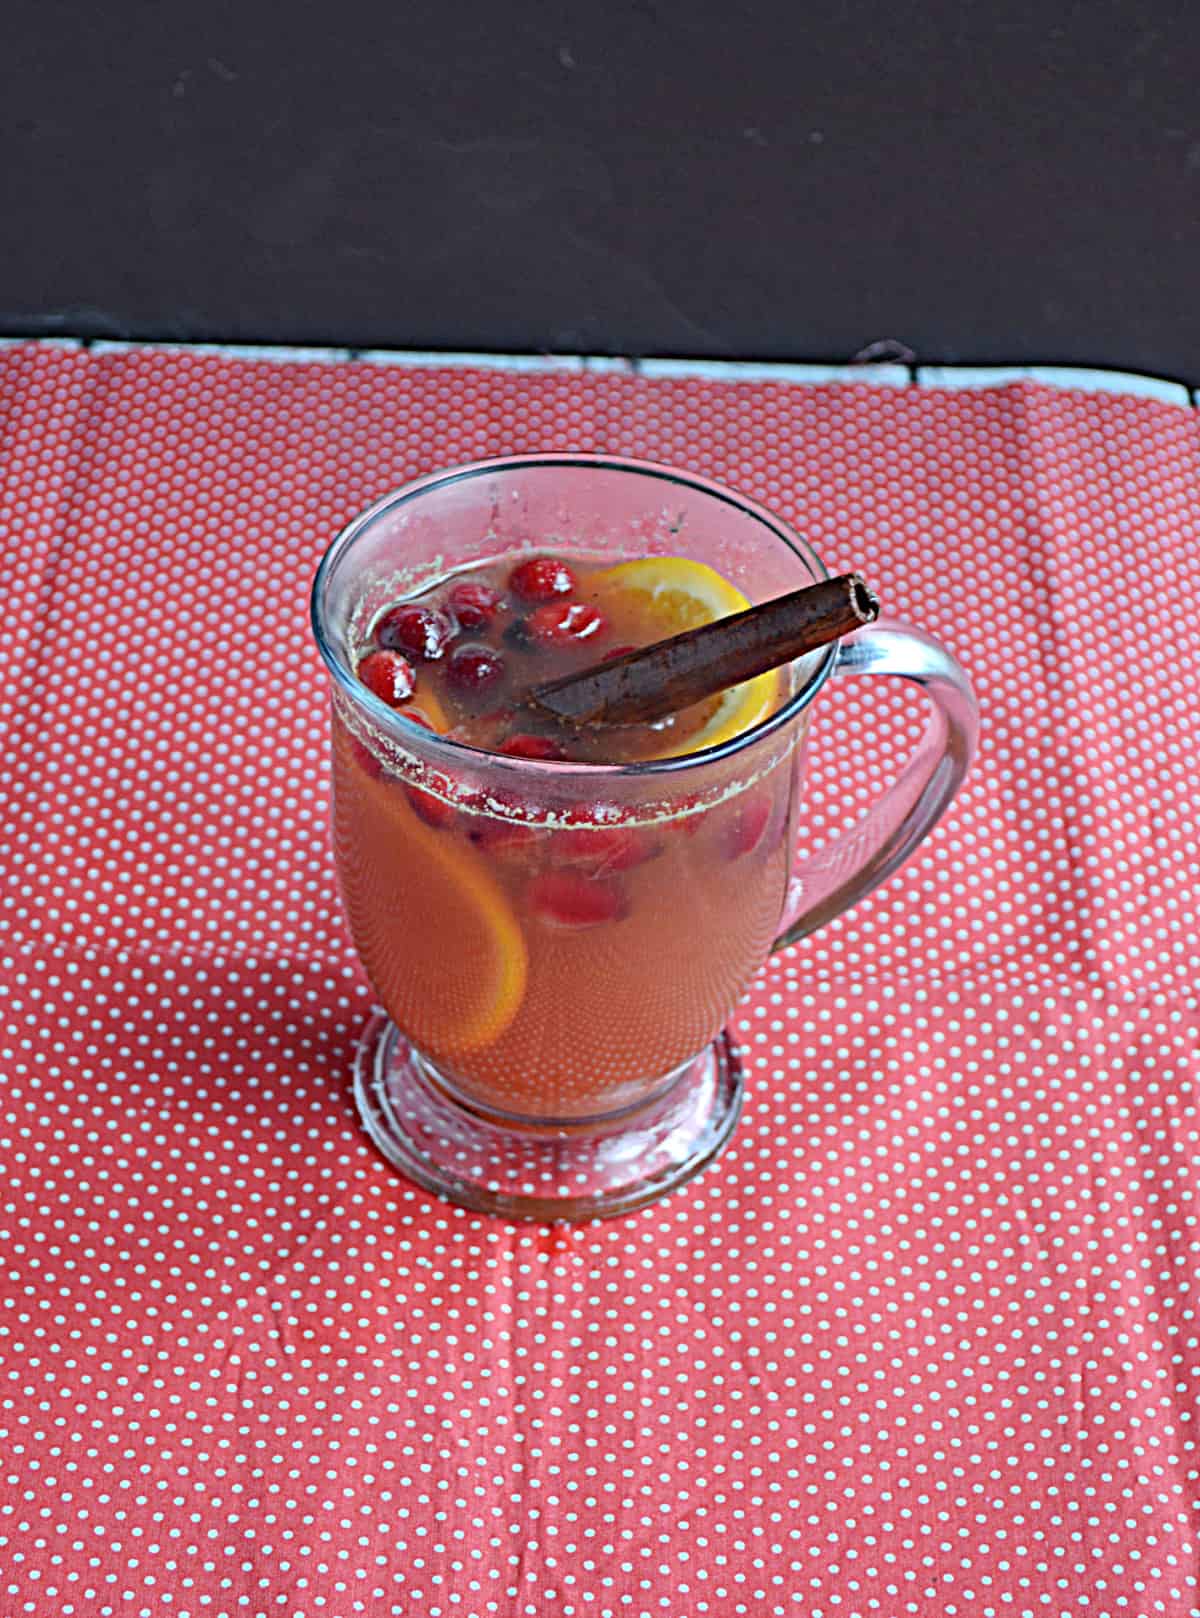 A mug of cider with cinnamon sticks, cranberries, and oranges in it.